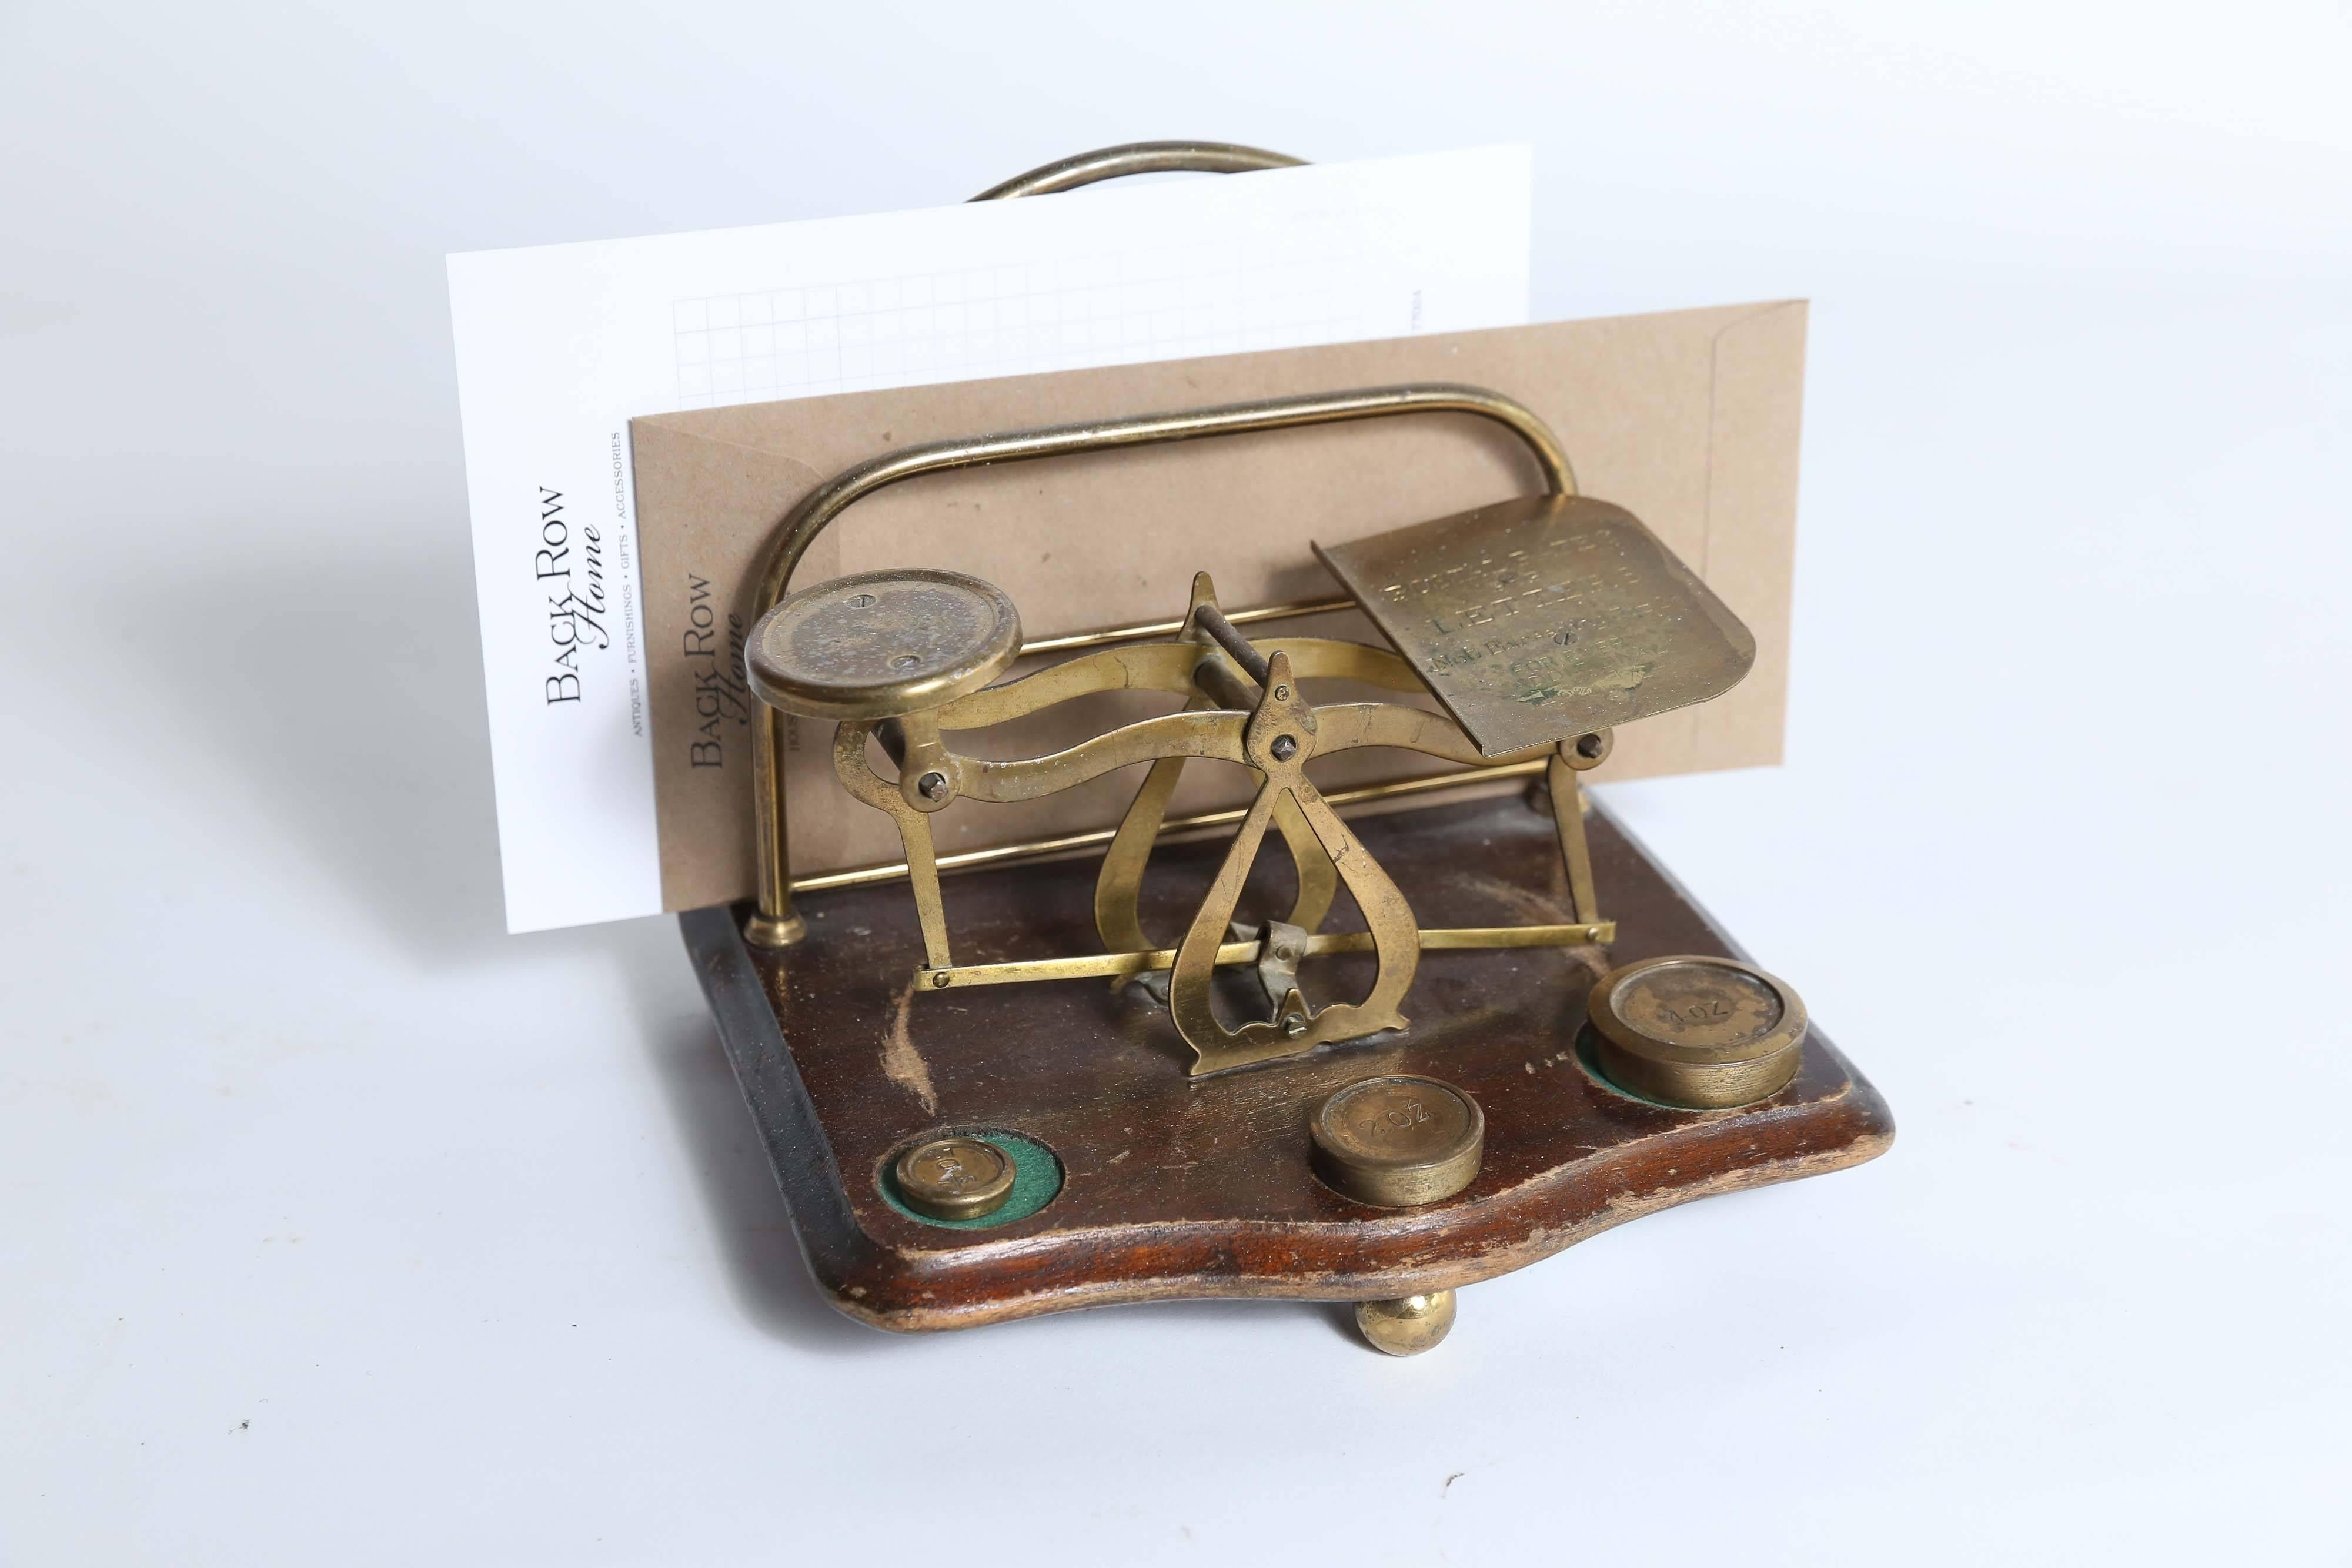 Early 20th Century Antique Postal Scale and Letter Holder, circa 1900